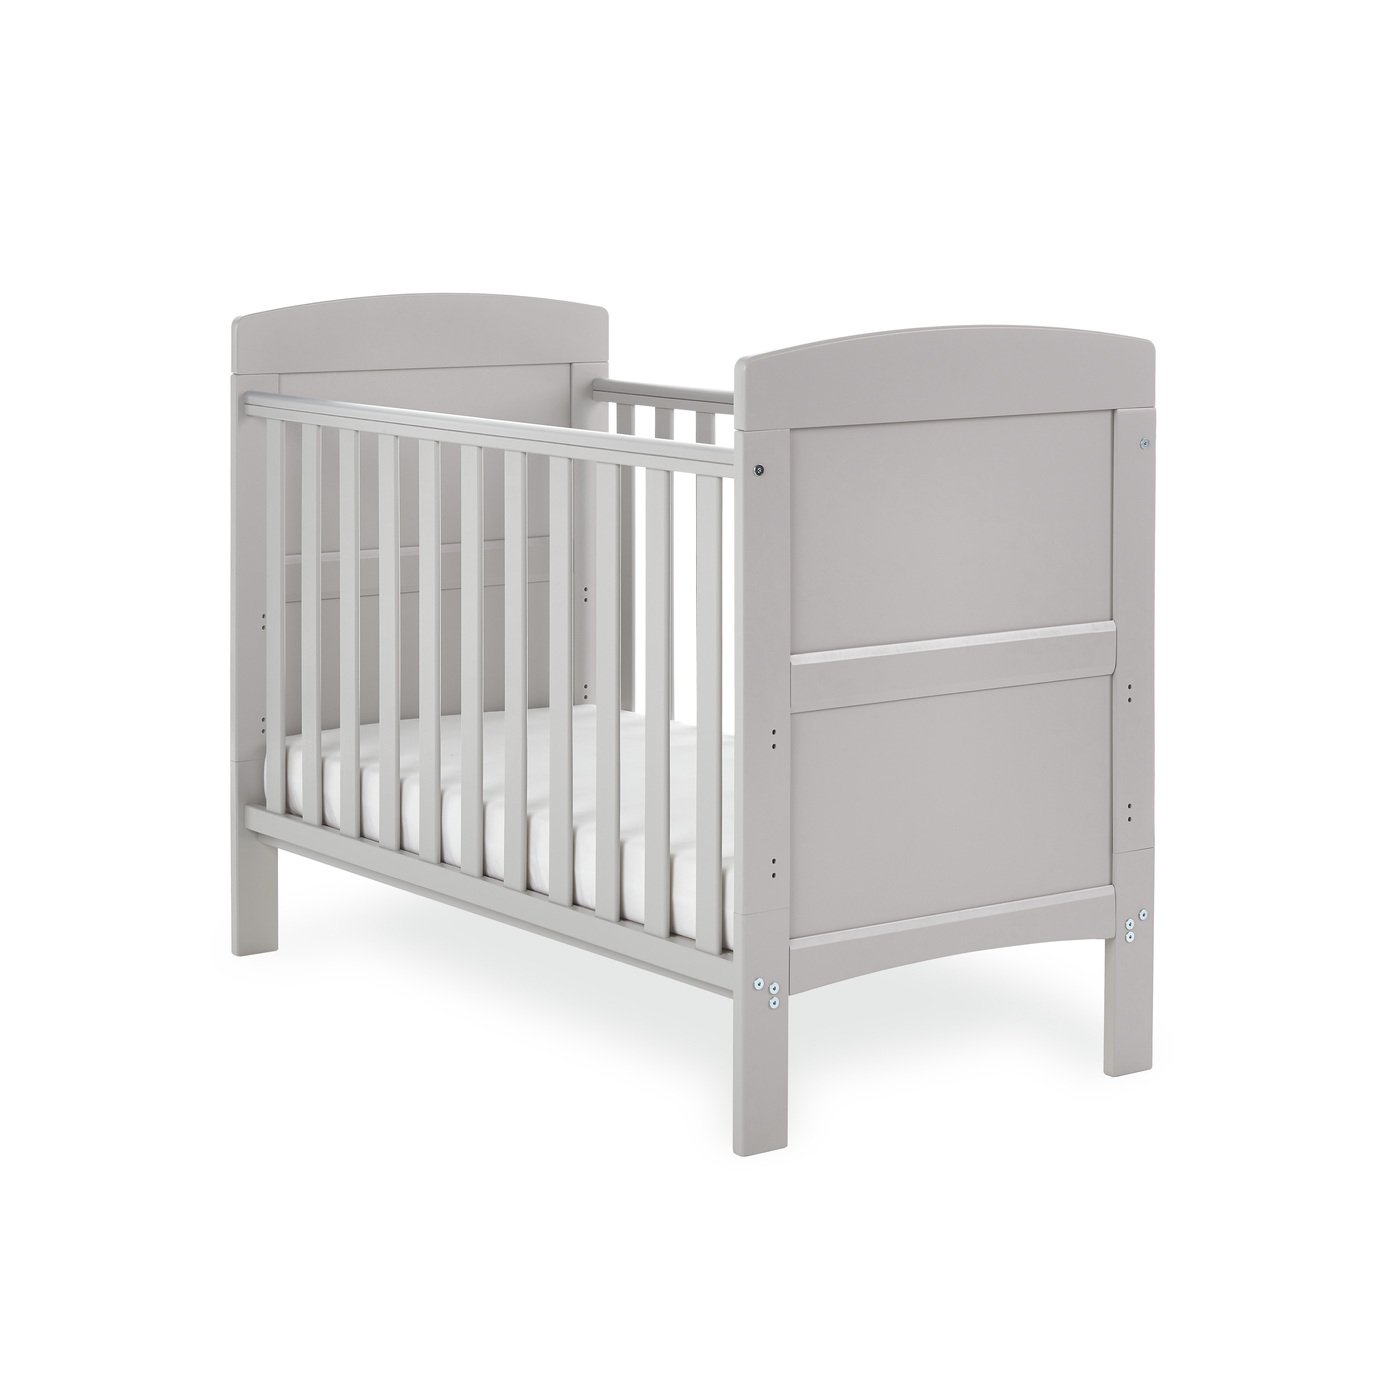 Obaby Grace Mini Cot Bed Review